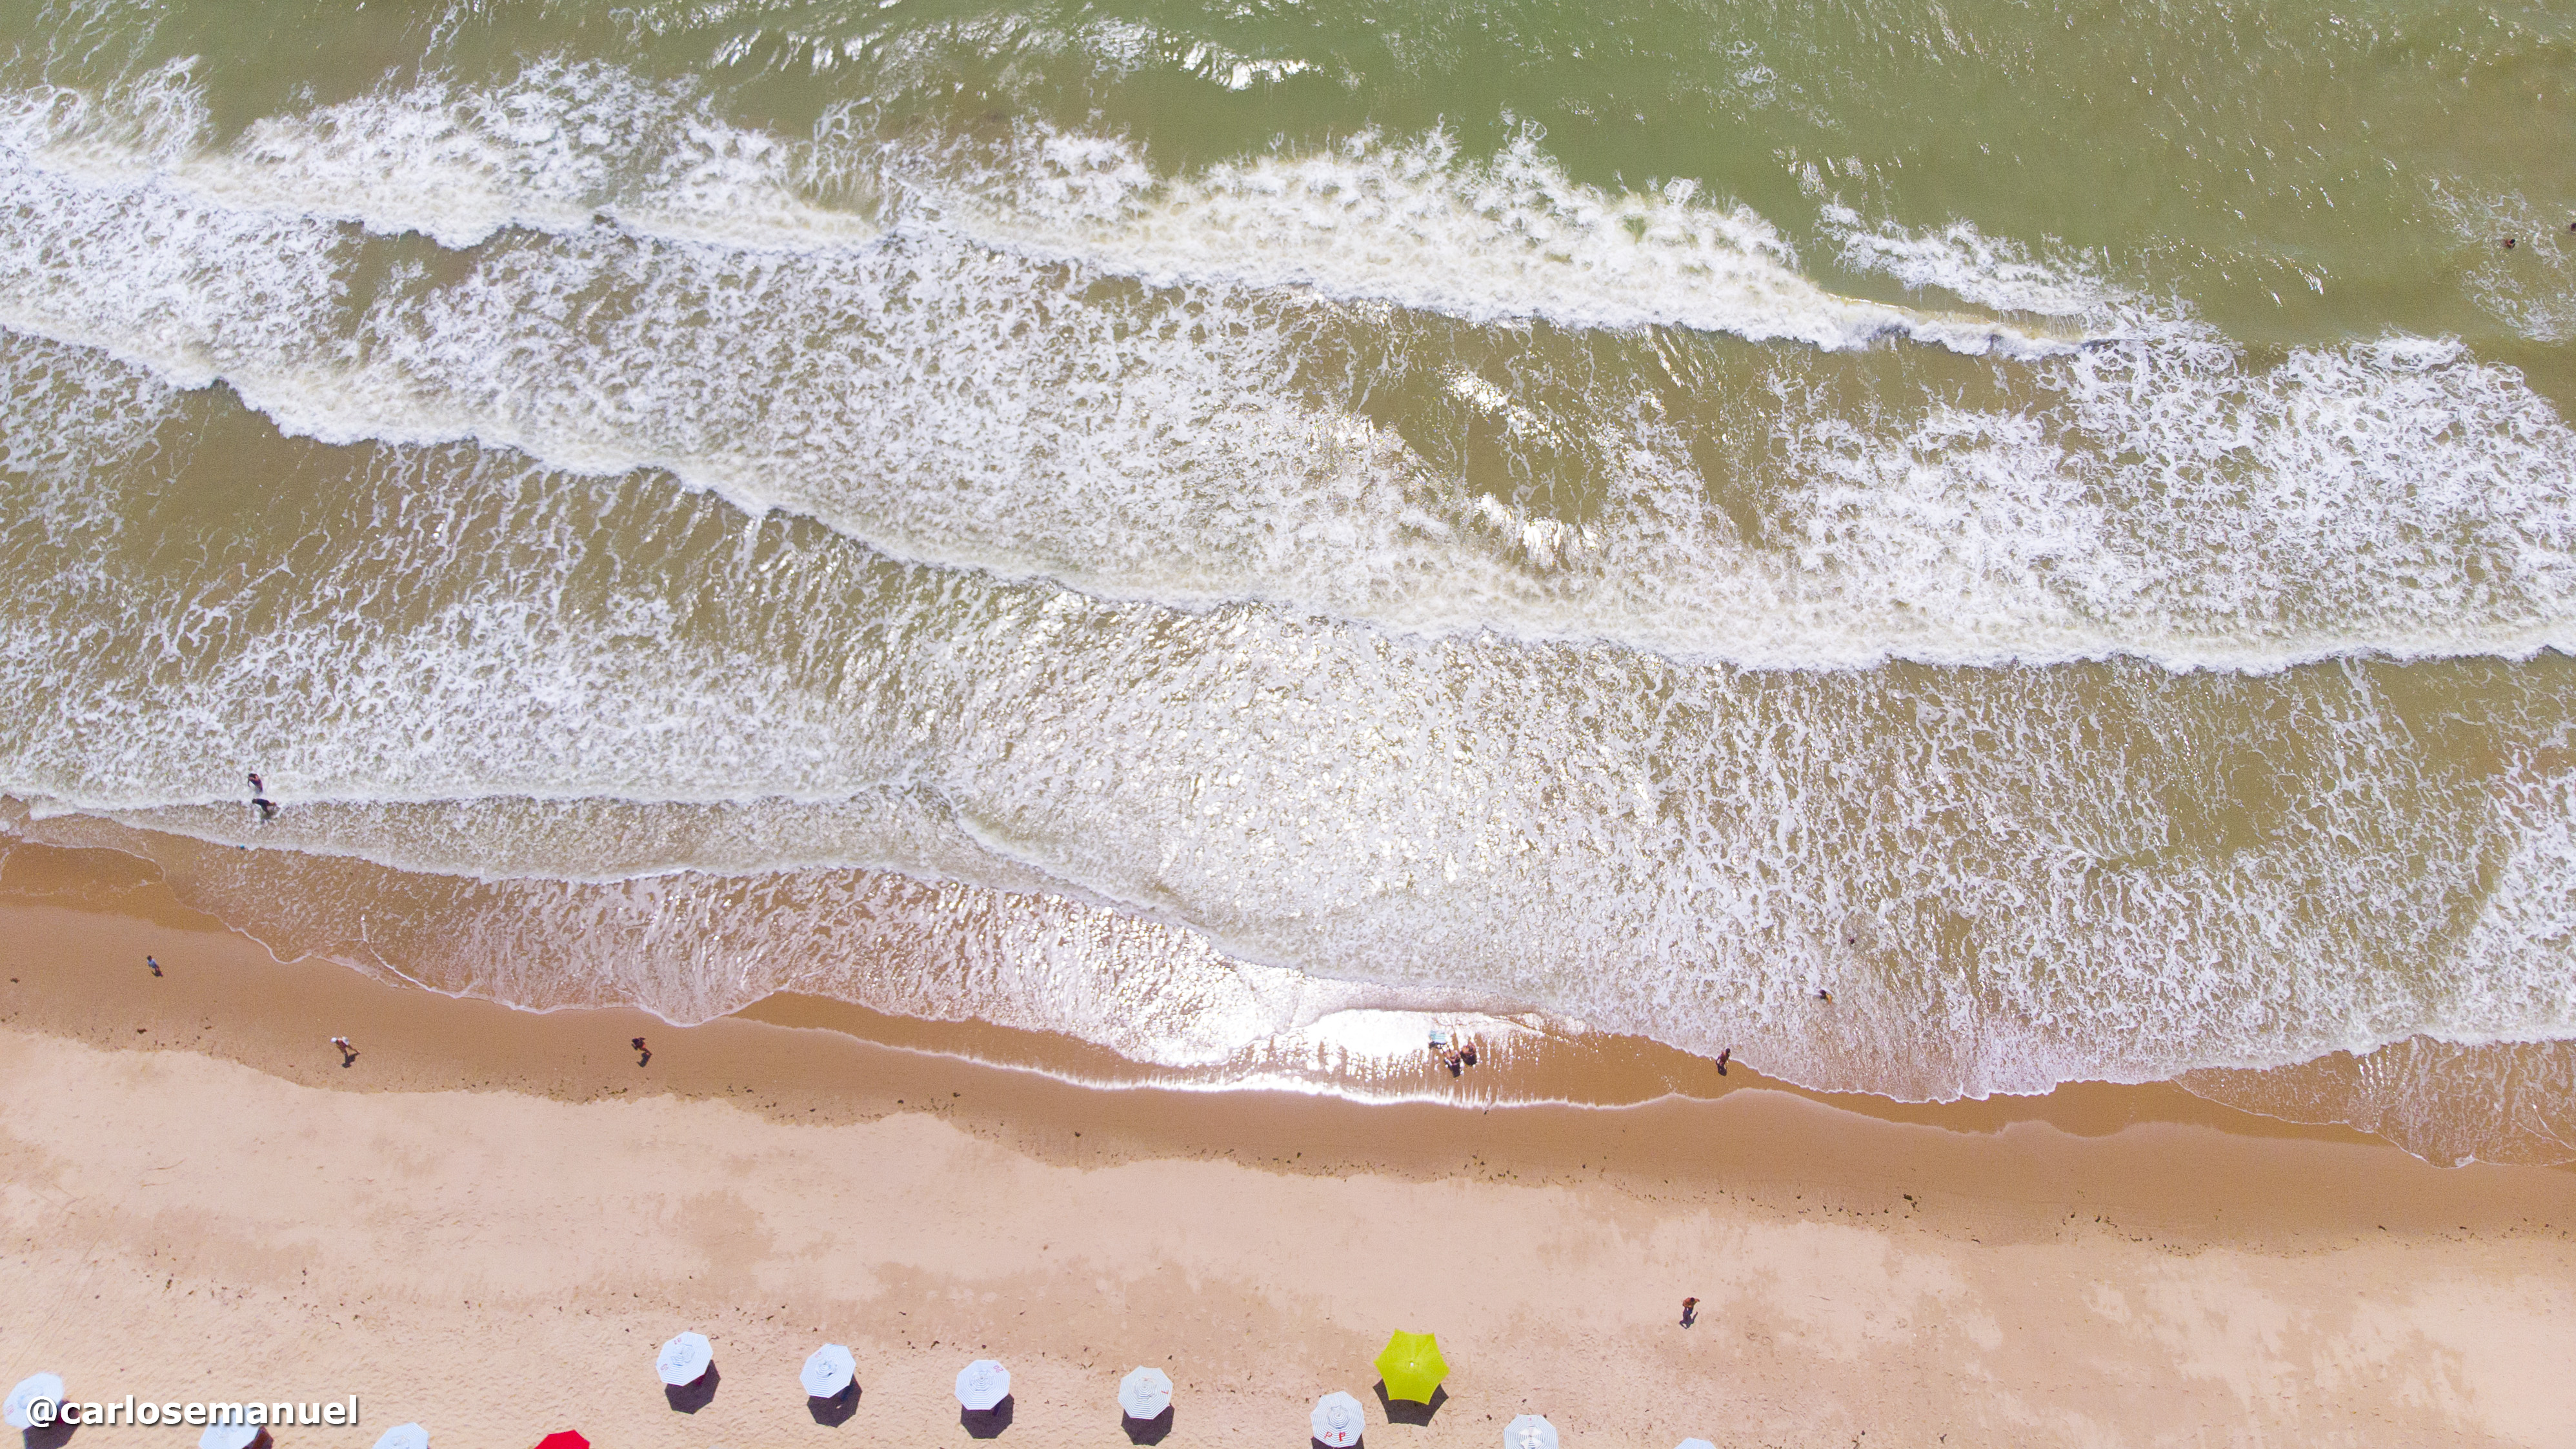 General 3992x2246 beach João Pessoa nature landscape drone drone photo aerial view top view Carlos Emanuel sea waves watermarked water